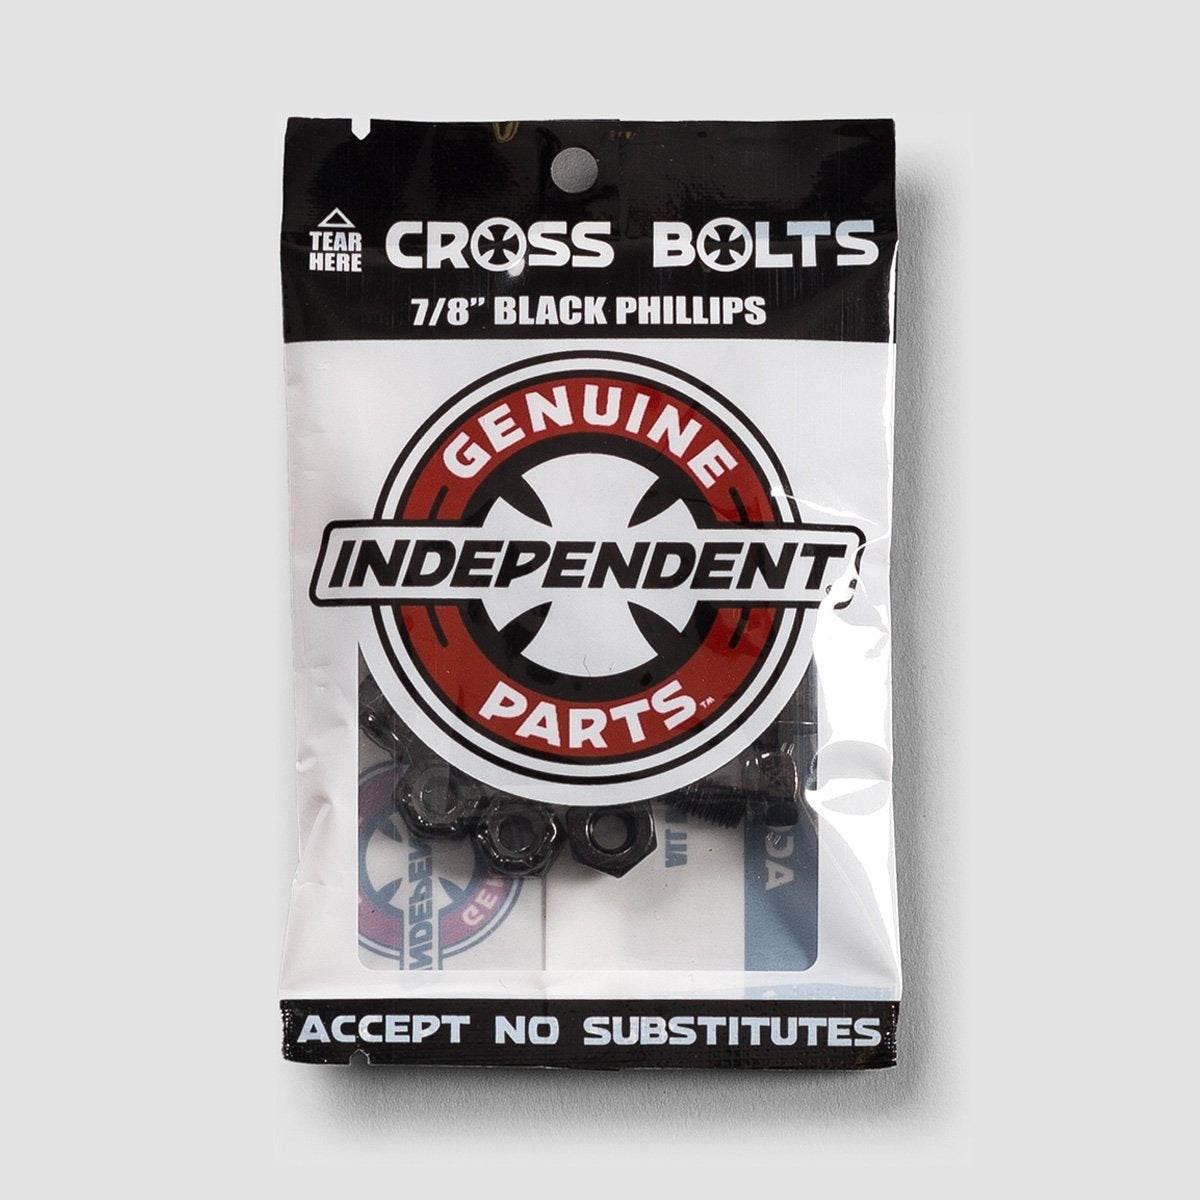 Independent Phillips Bolts 7/8 Inch Black x8 - Skateboard